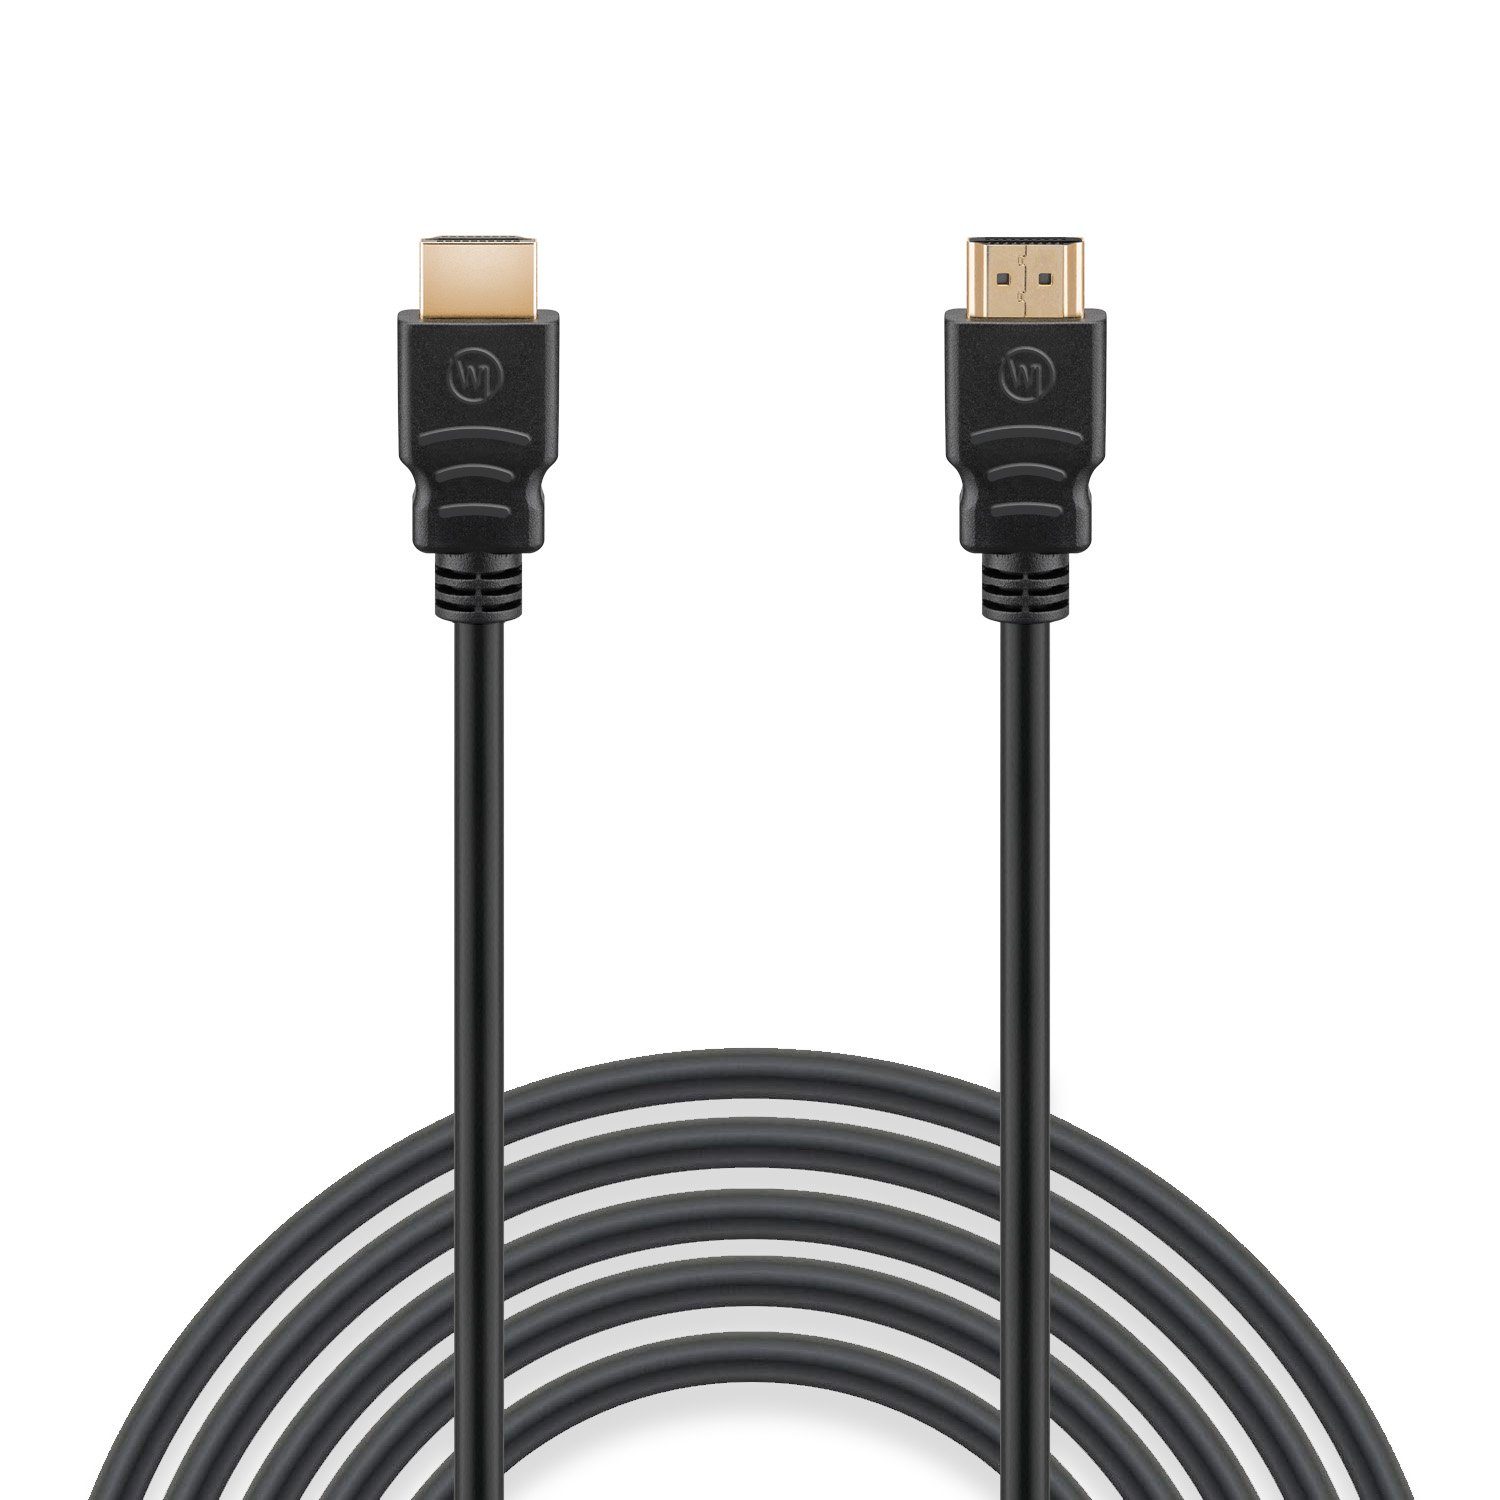 Wicked Chili »Wicked Chili HDMI 8k 1m 2m 3m« HDMI-Kabel, HDMI Typ A, HDMI  (100 cm), HDMI 2.1 Kabel, 8K HDMI Kabel, 8K 60Hz, 4K 120Hz, HDR10, 48Gbps  eARC, Dolby Vision UHD,